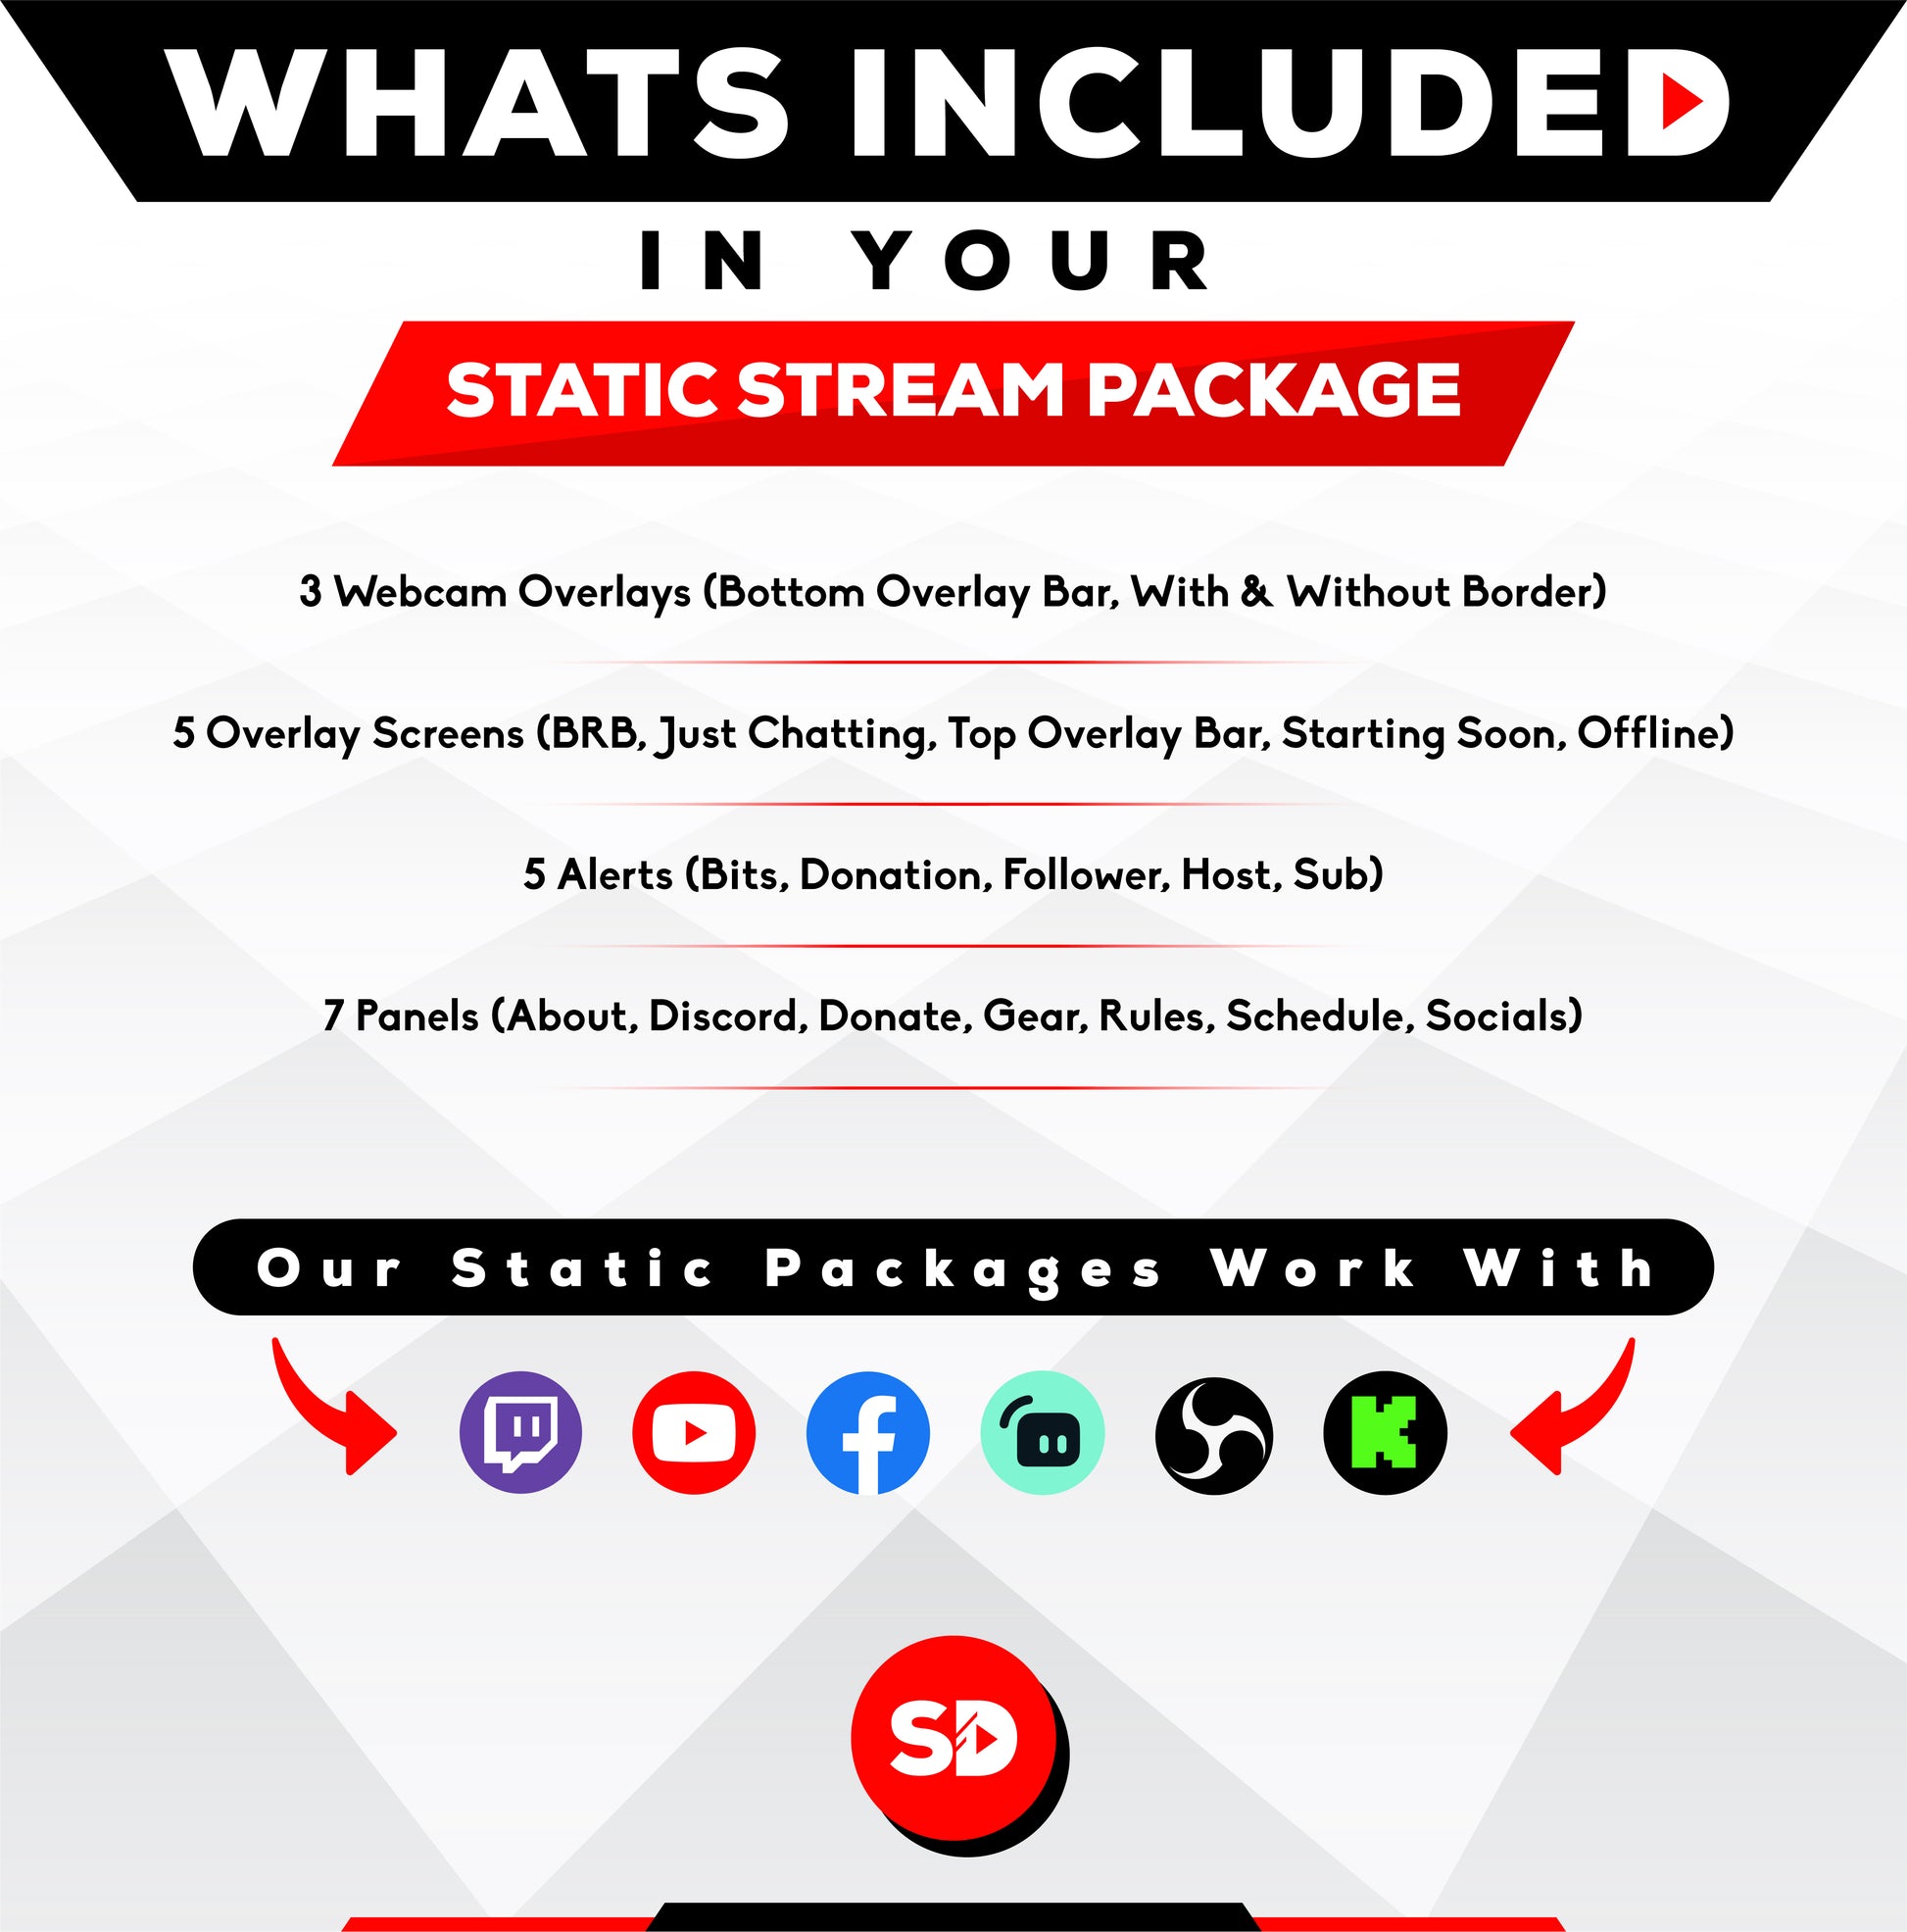 whats included in your package - static stream overlay package - gold rush - stream designz